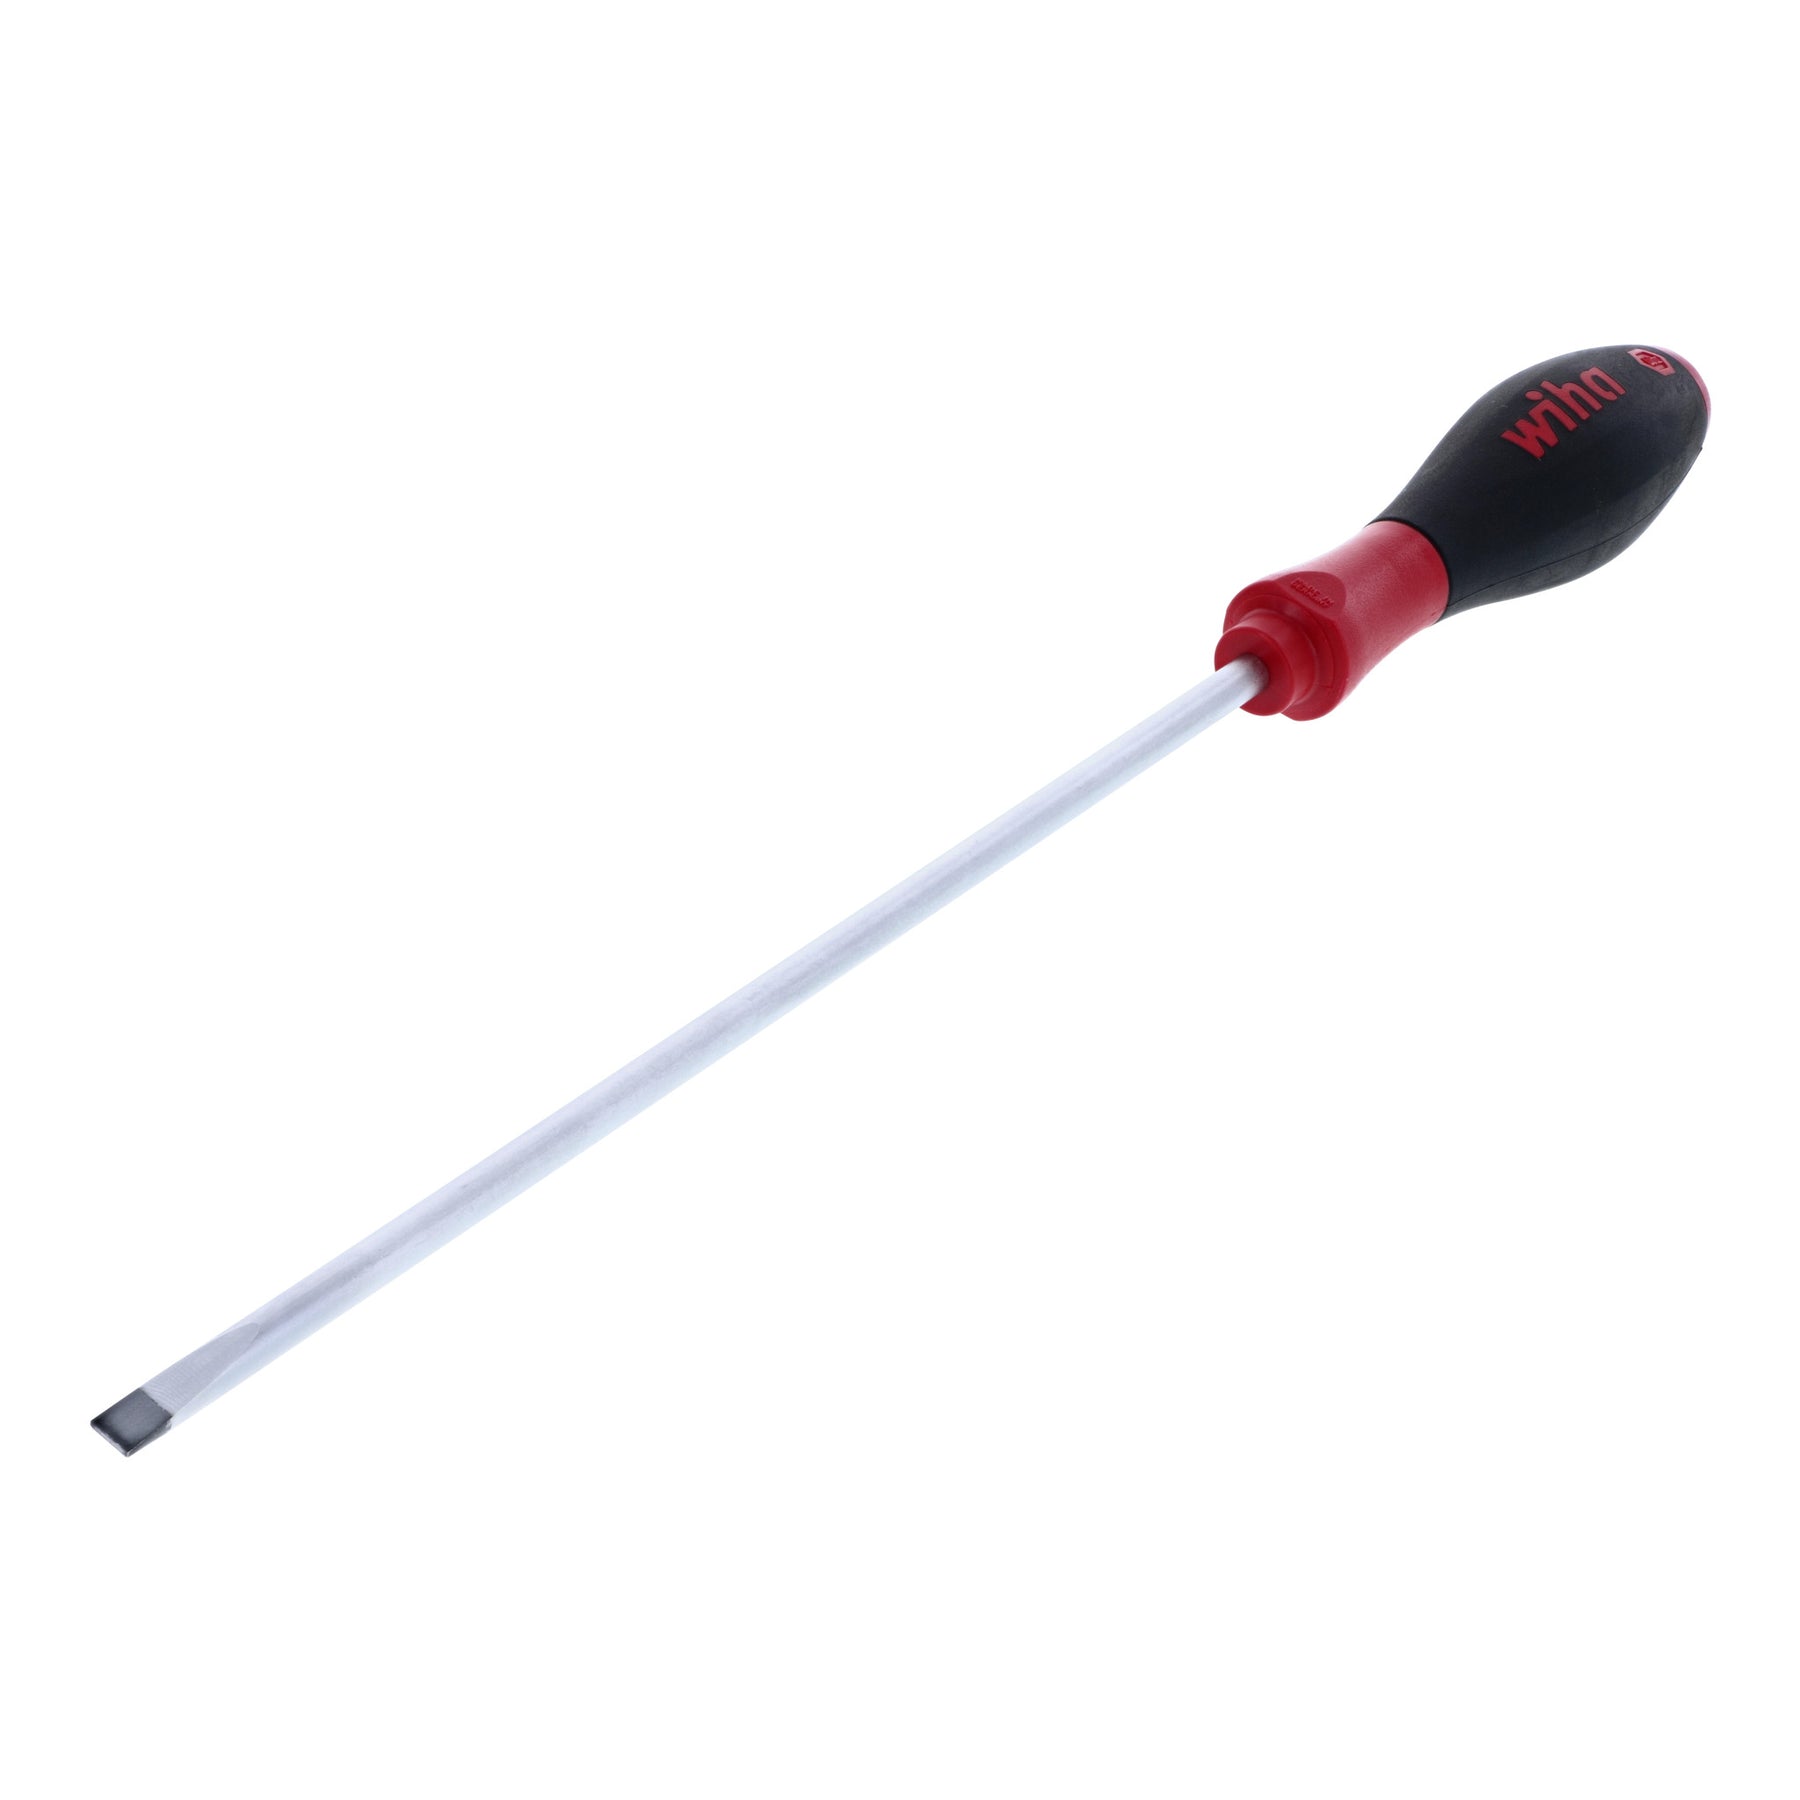 SoftFinish Slotted Screwdriver 5.5mm x 200mm